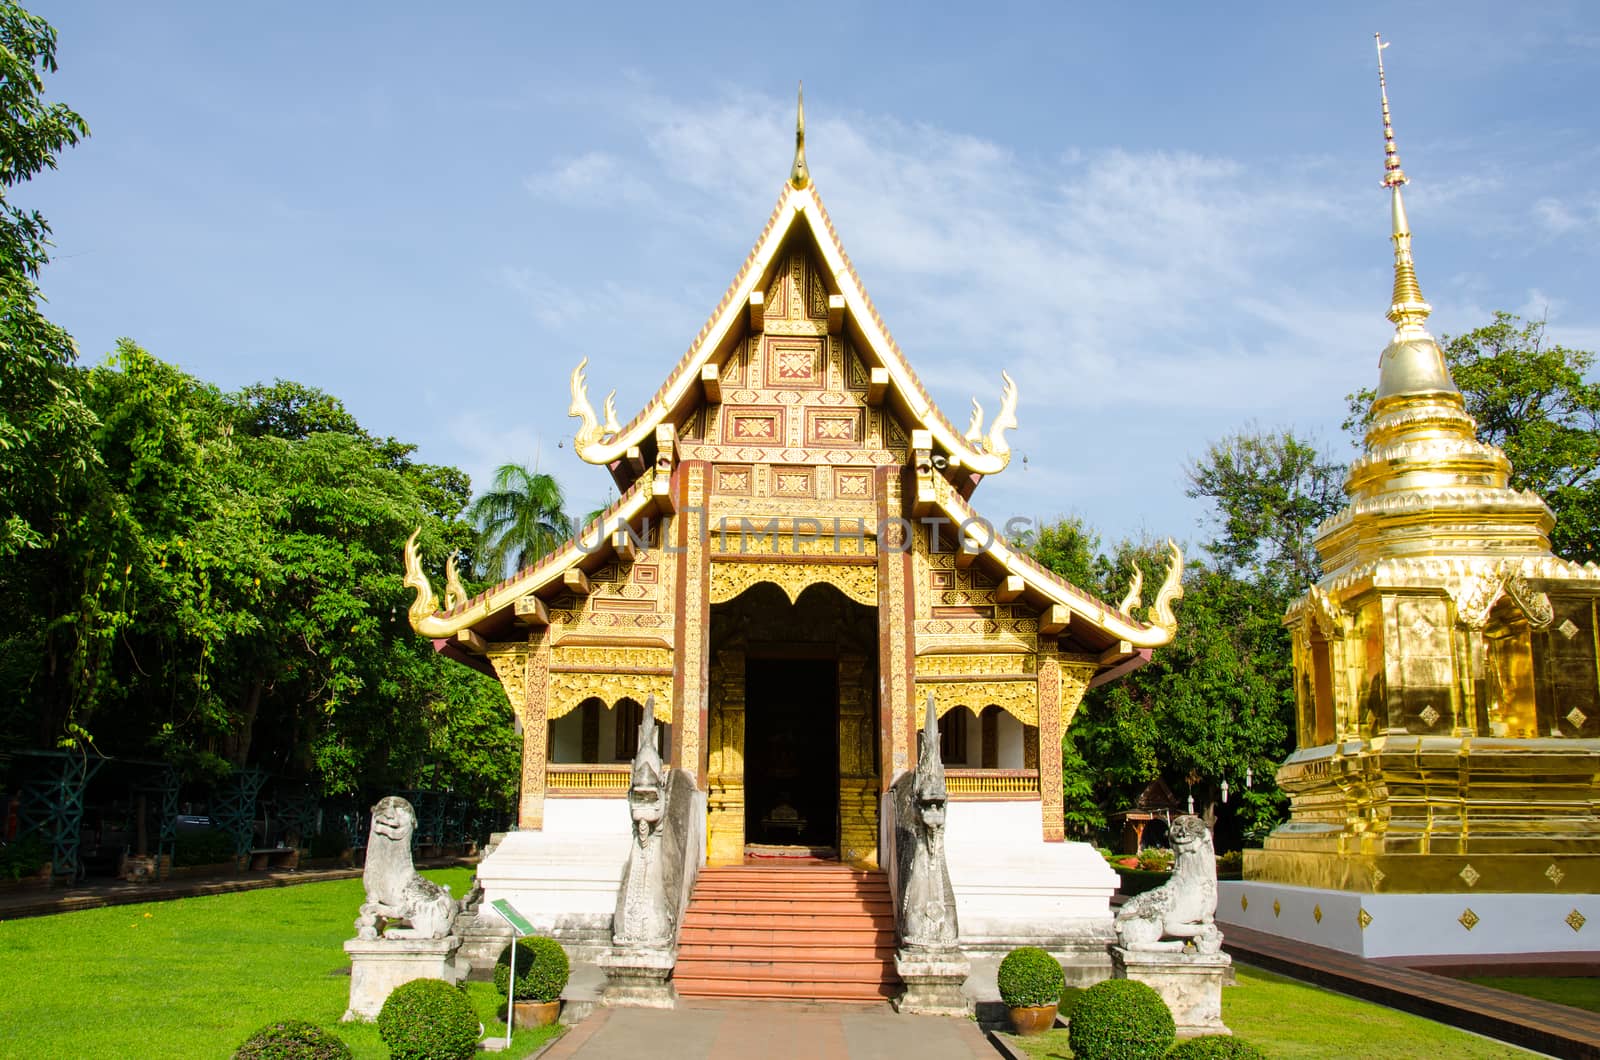 phra sing temple is the most famous temple in chiangmai , thailand by migrean